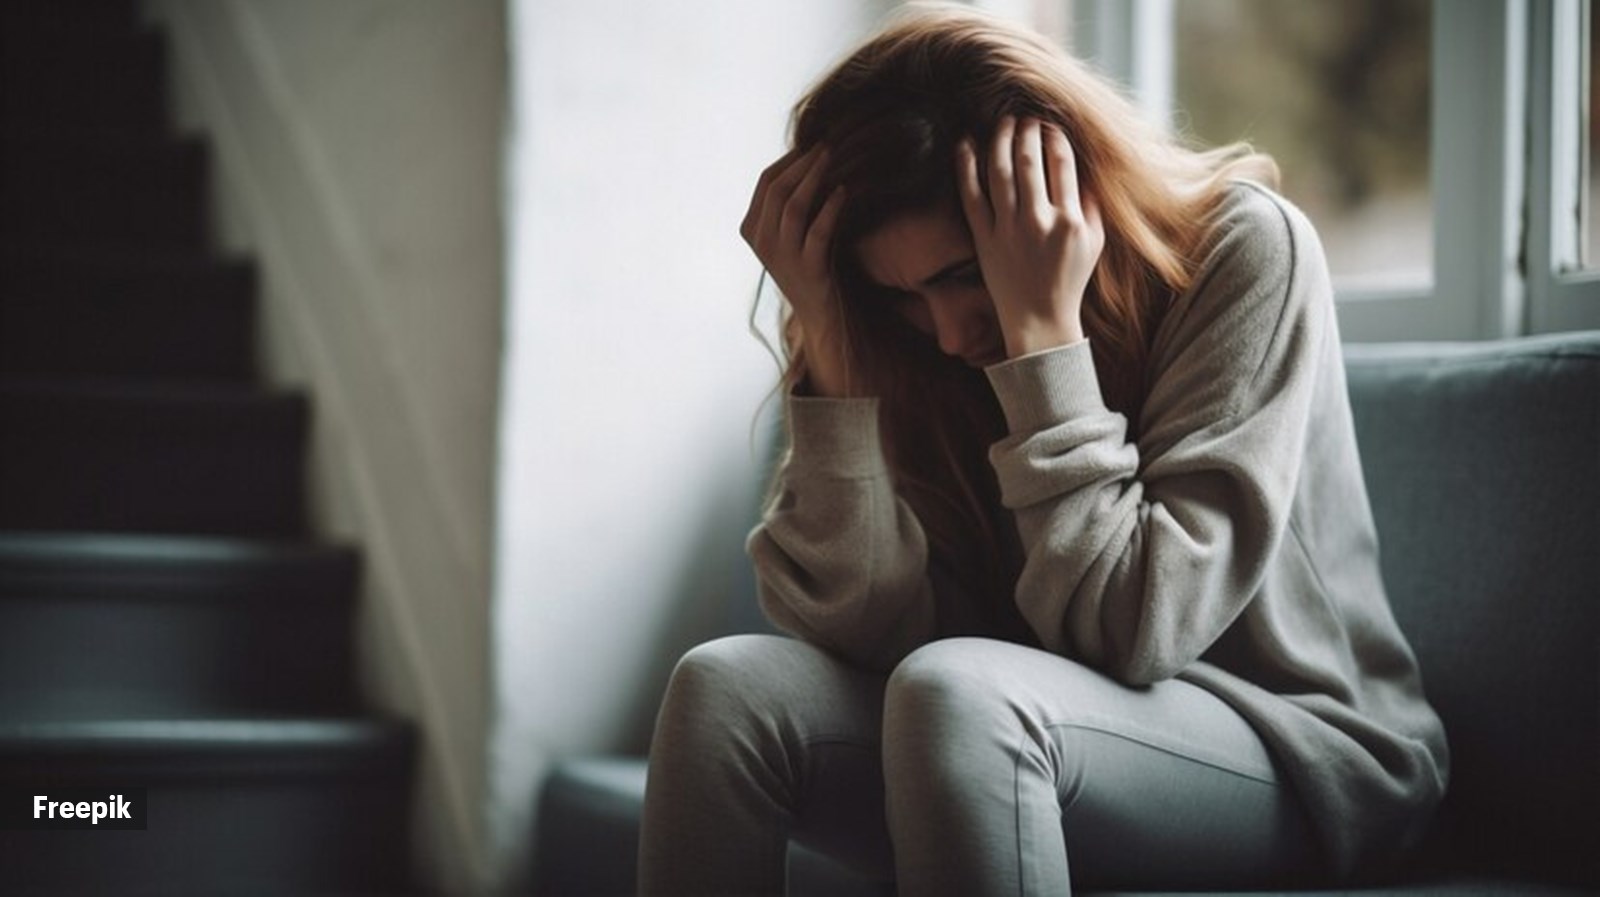 Eating disorders and depression,Link between eating disorders and depression